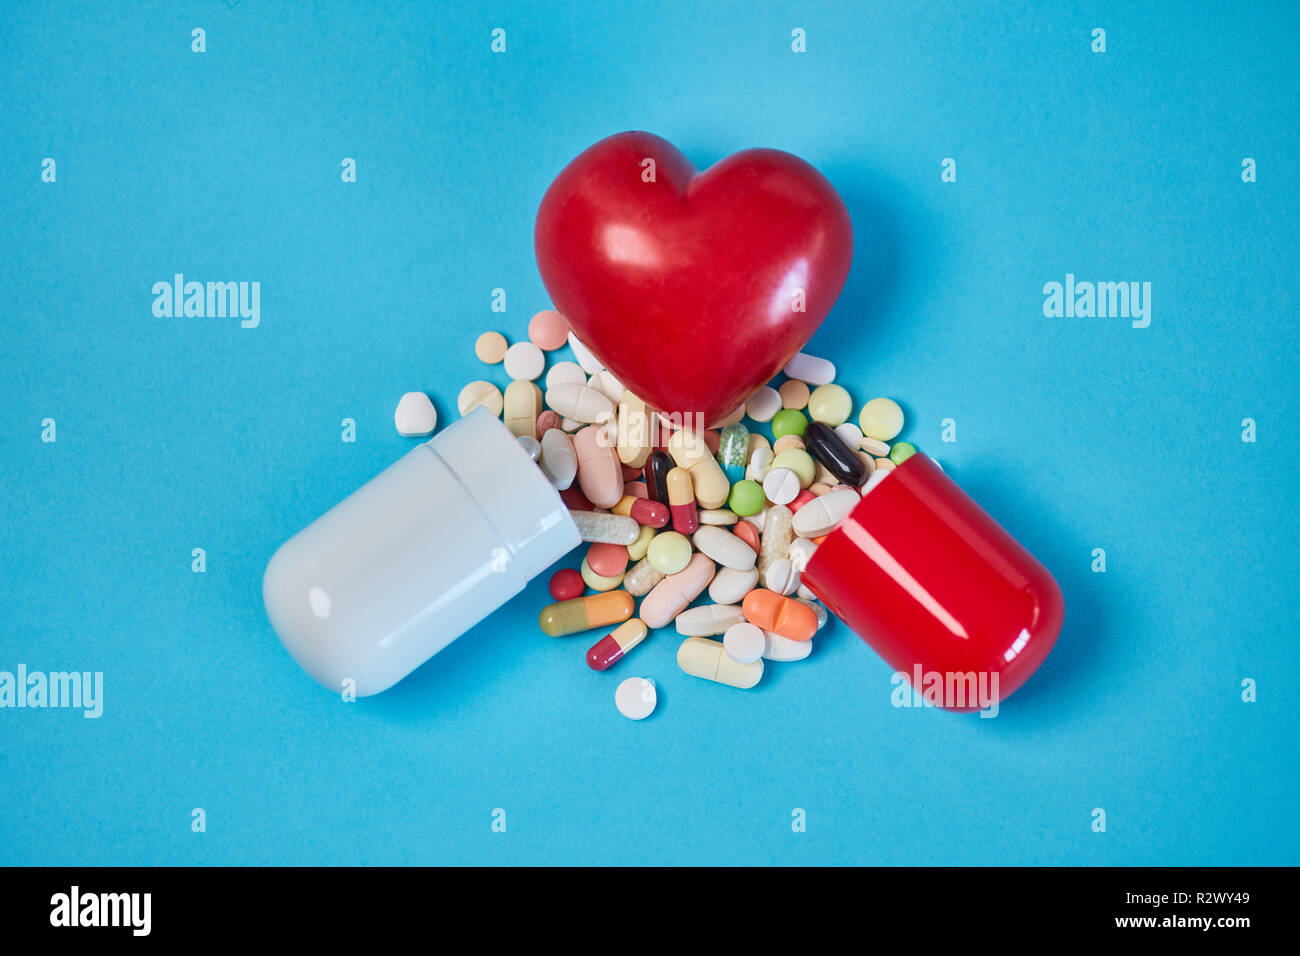 Red heart on broken capsule with medication as a heartbroken concept Stock Photo